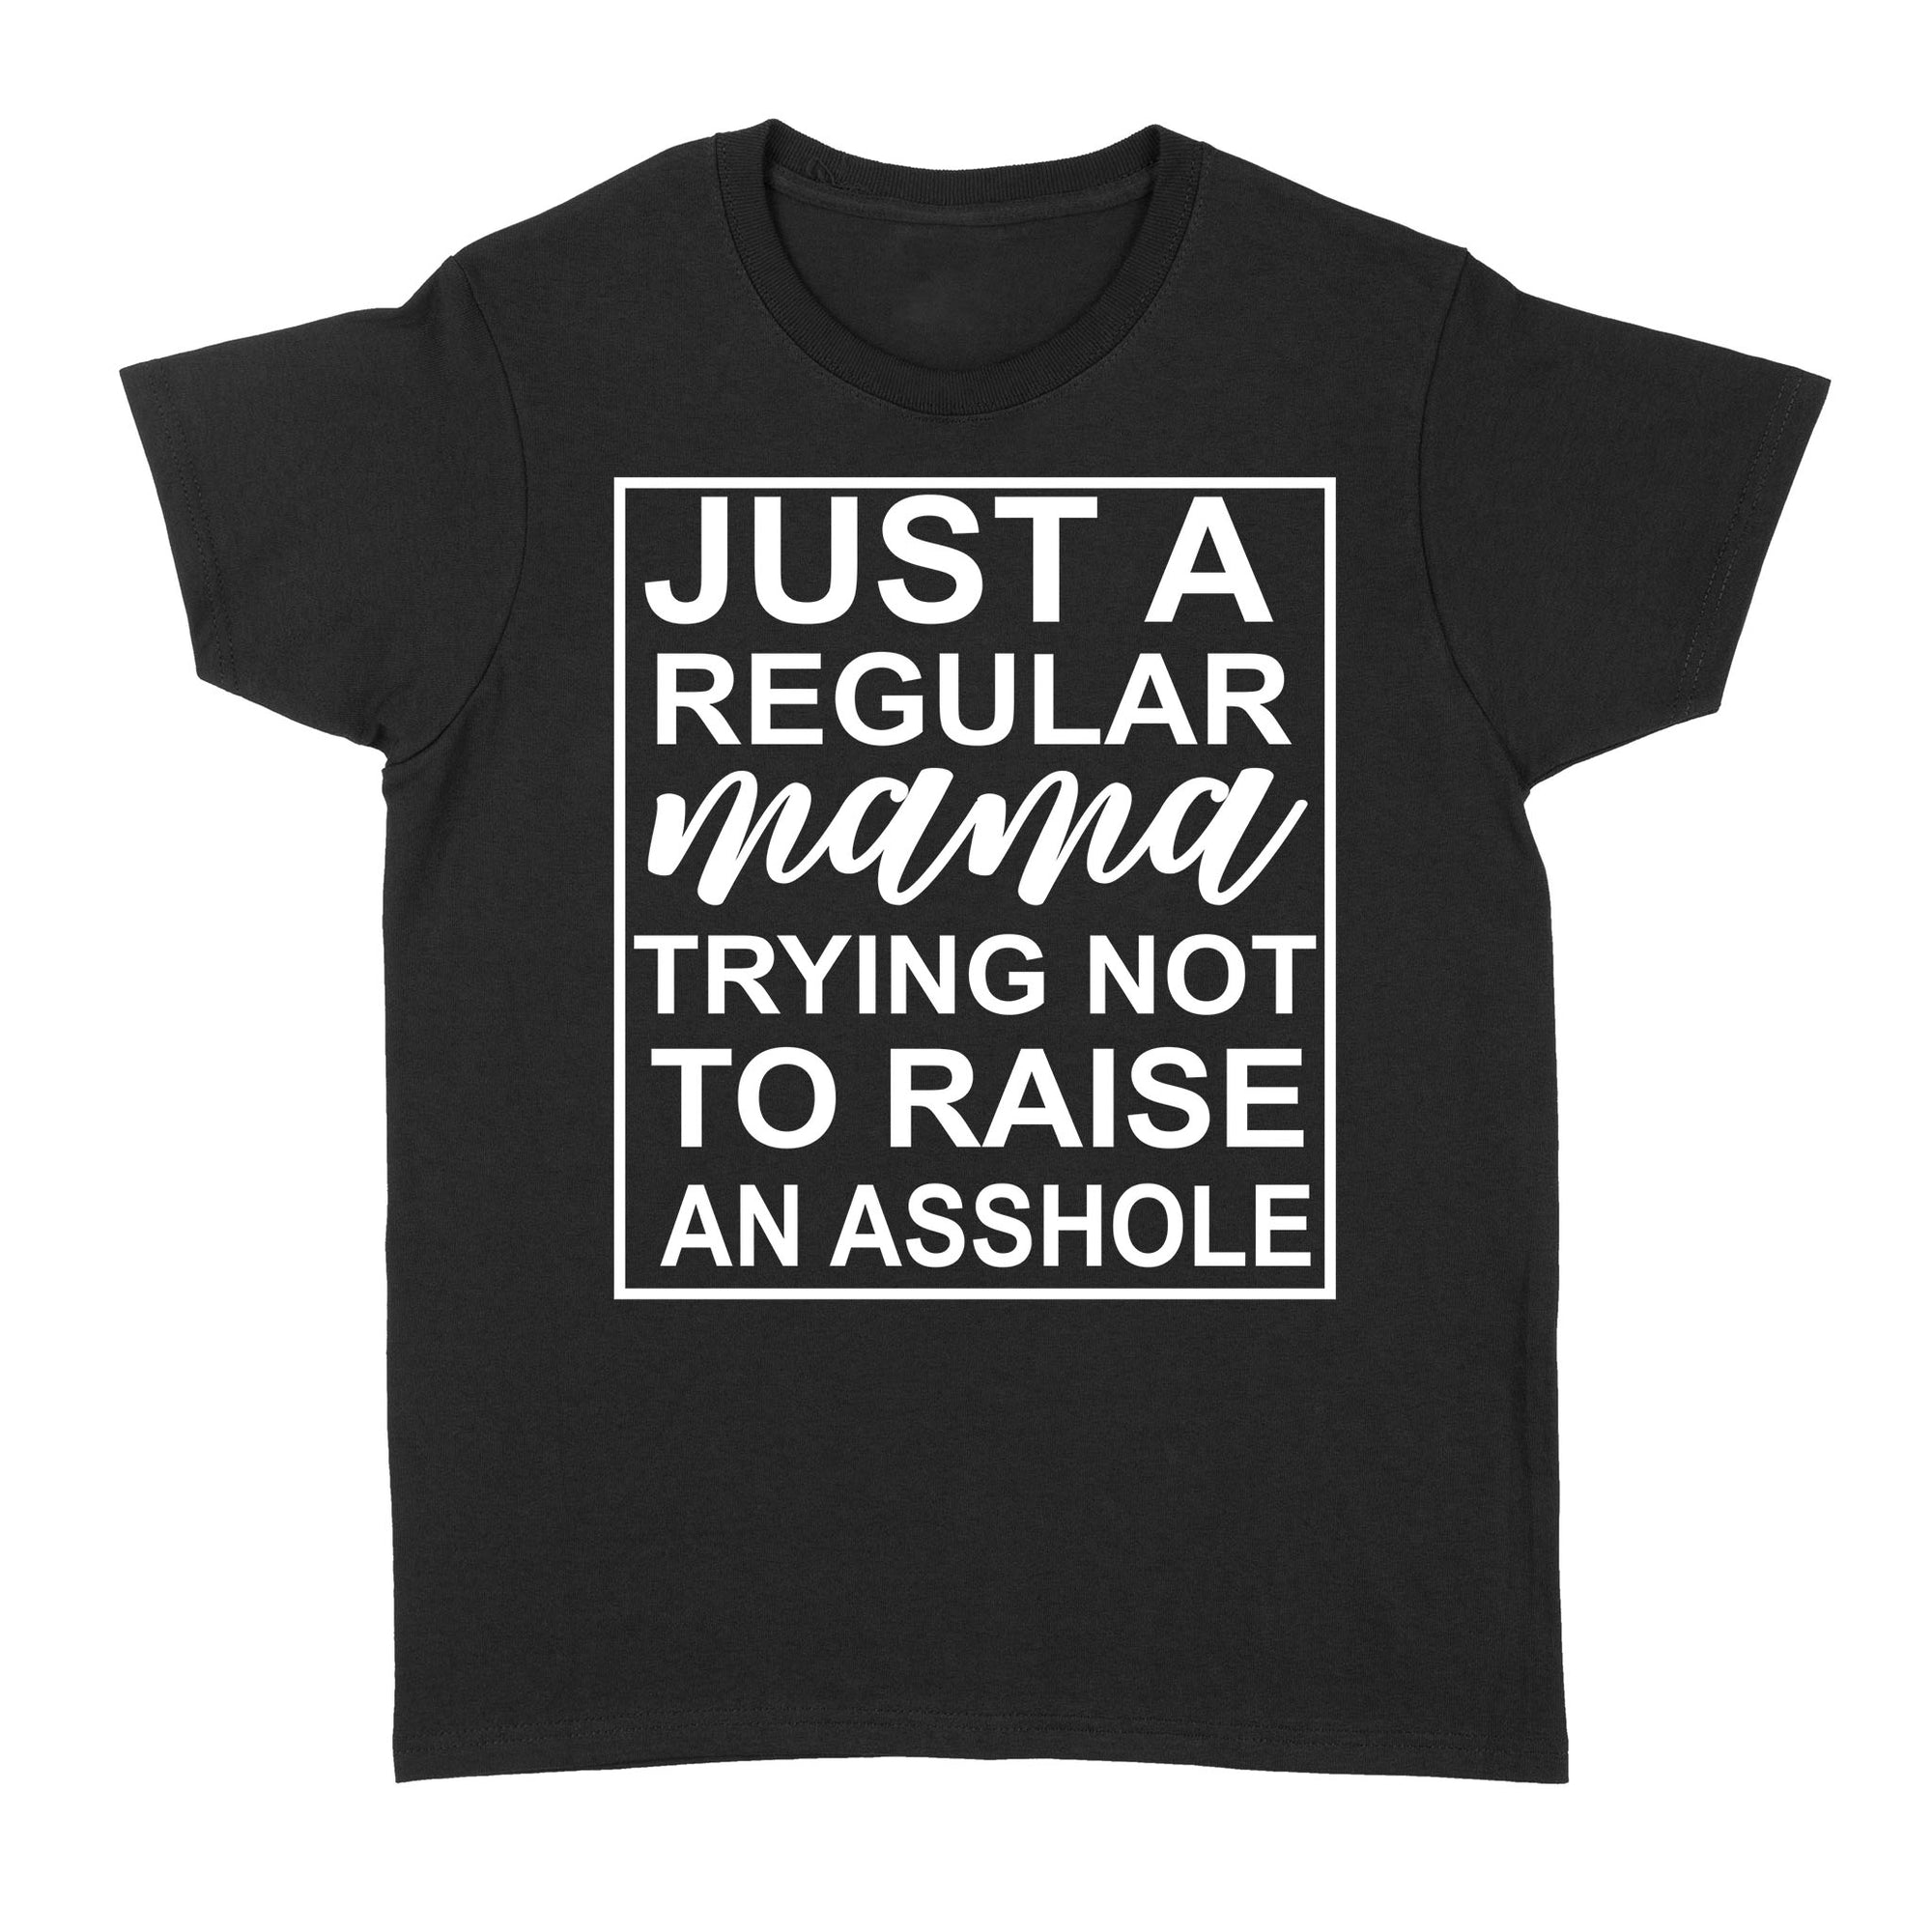 Just A Regular Mom Trying Not To Raise An Asshole Funny Gift Ideas for Mom Mother From Son Daughter - Standard Women's T-shirt